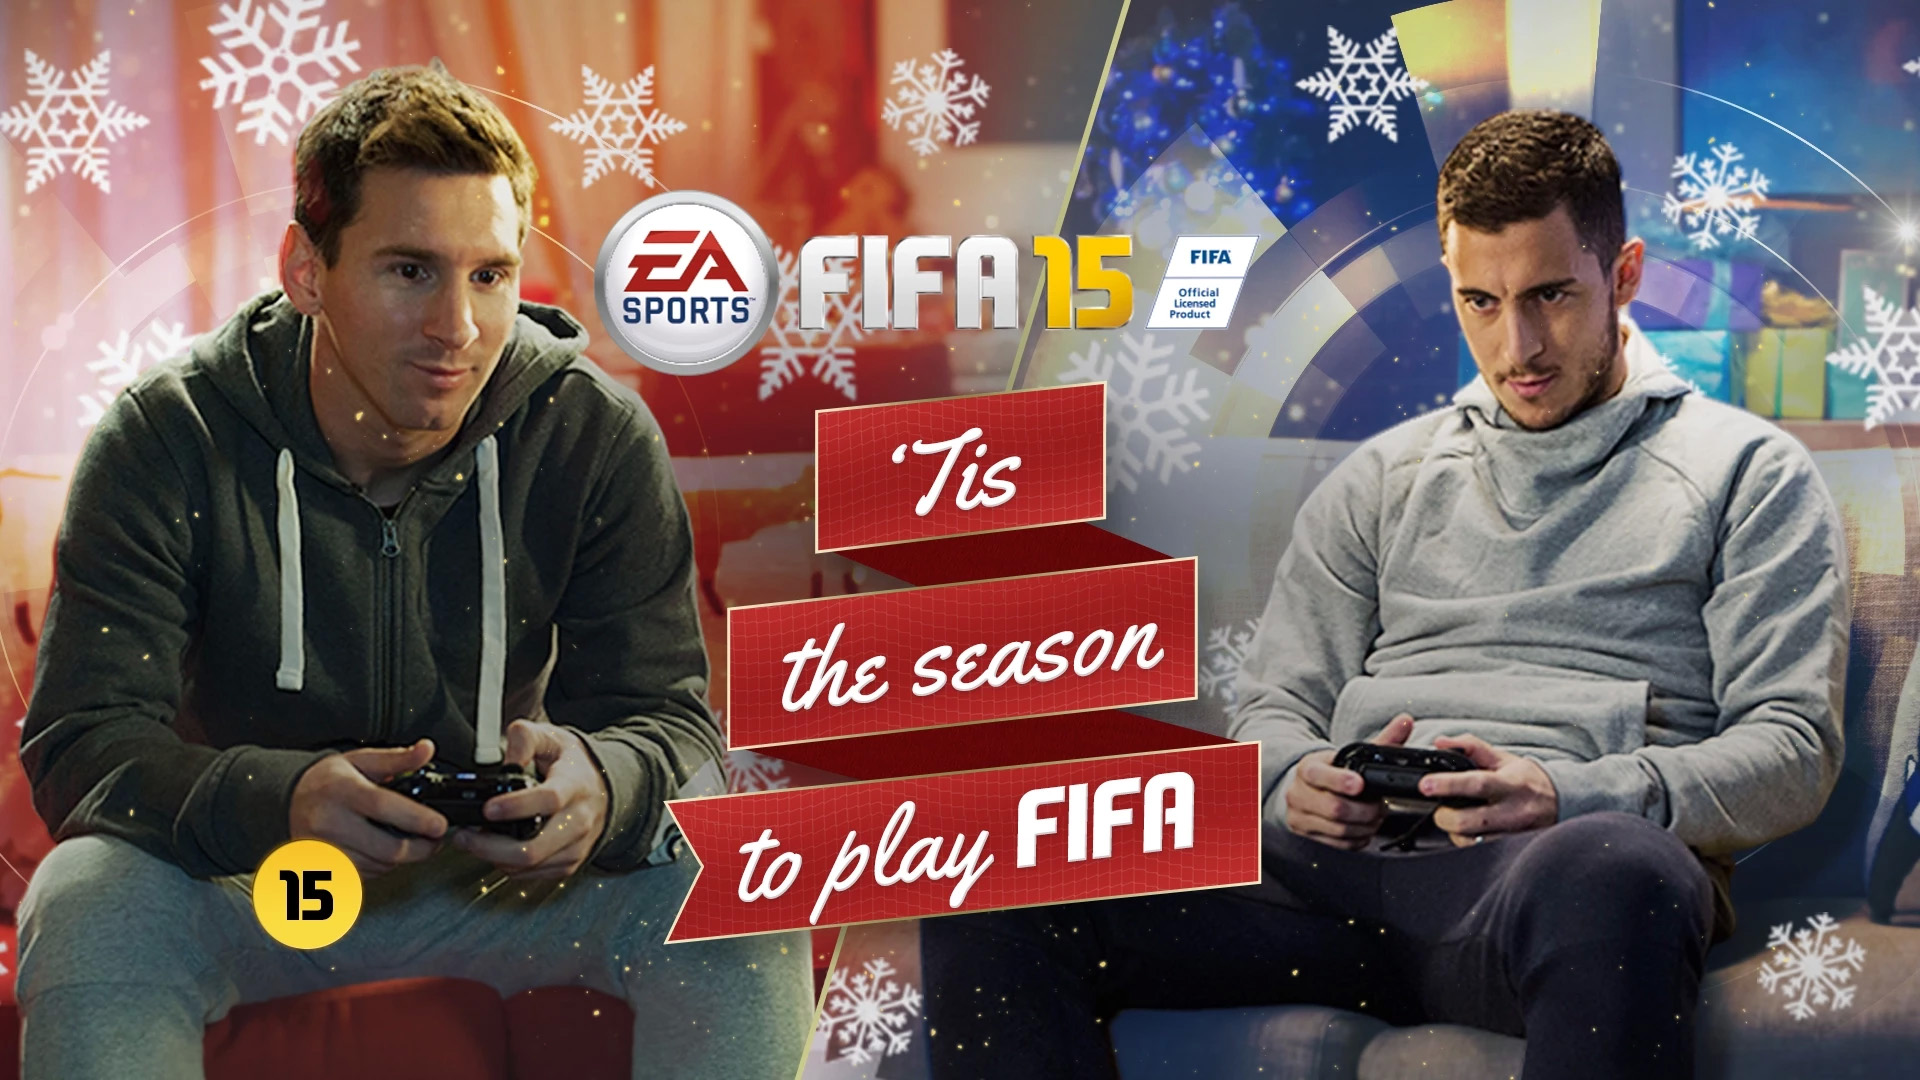 ‘Tis the season to play FIFA! Watch the FIFA 15 Christmas Commercial with Messi vs Hazard.